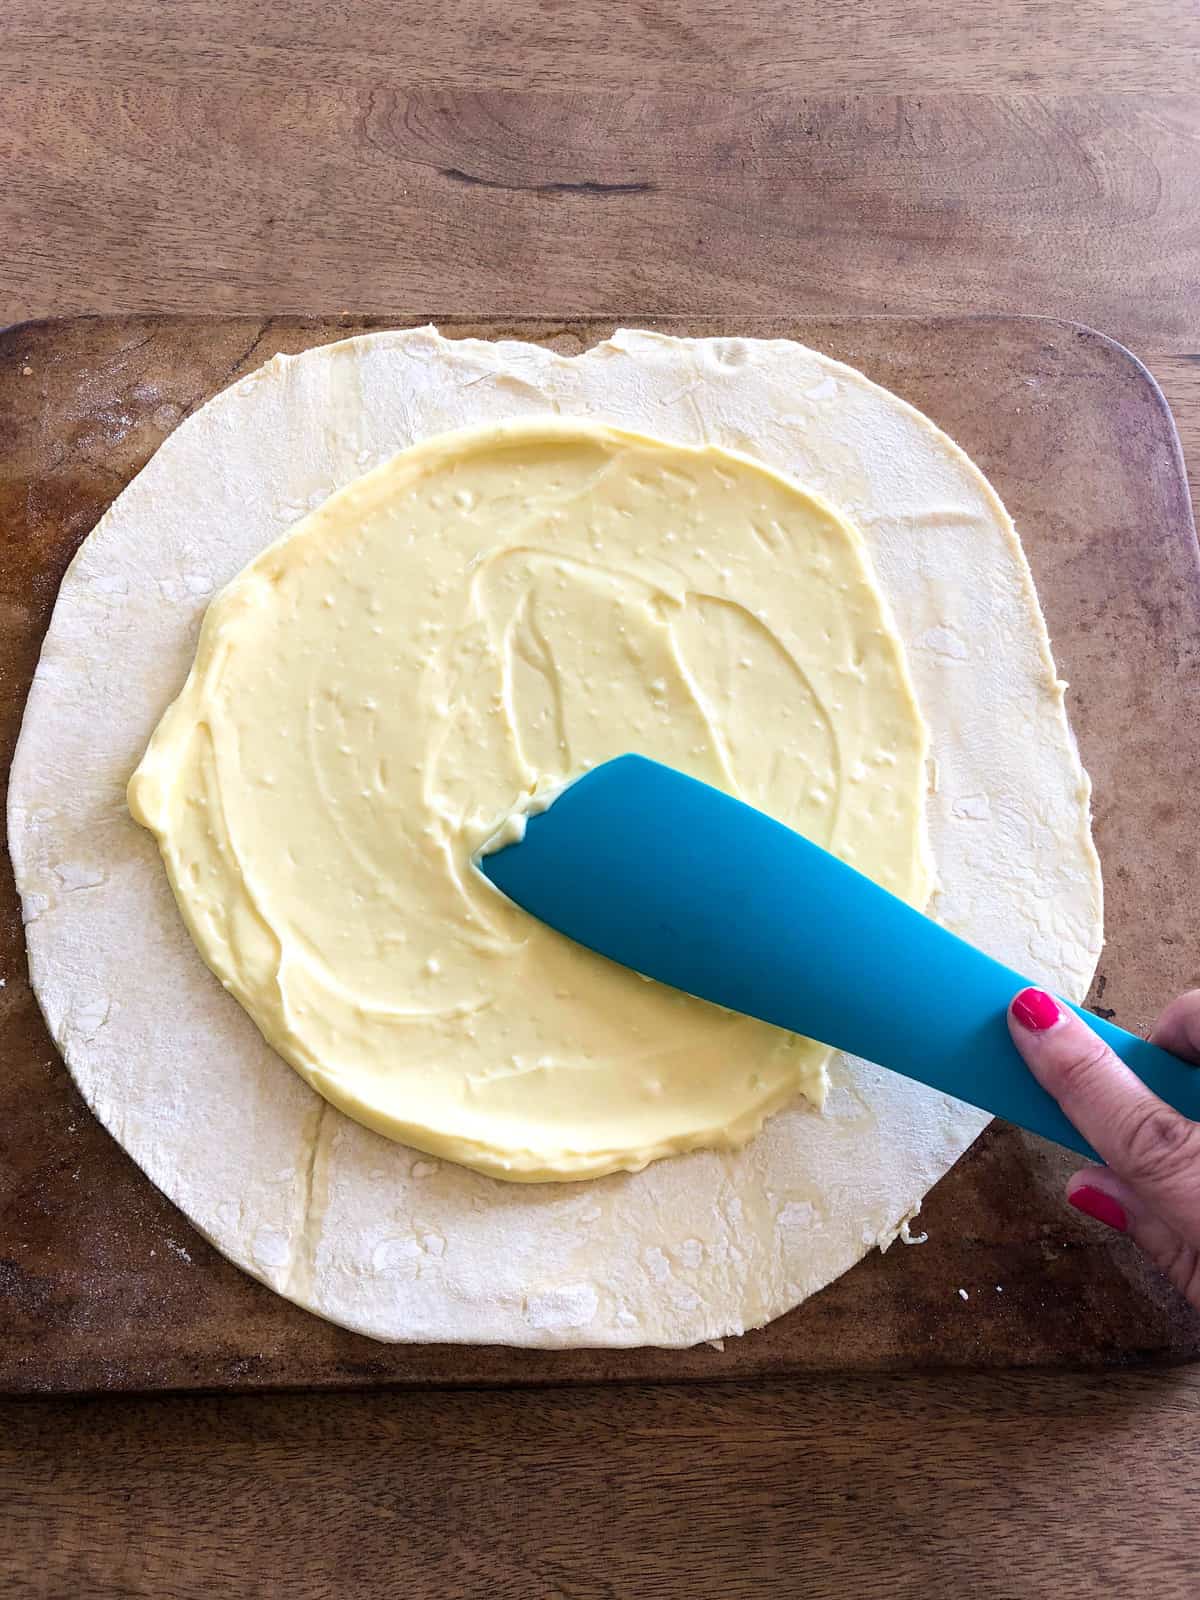 Spread the cream cheese mixture to within a few inches of the dough edges.